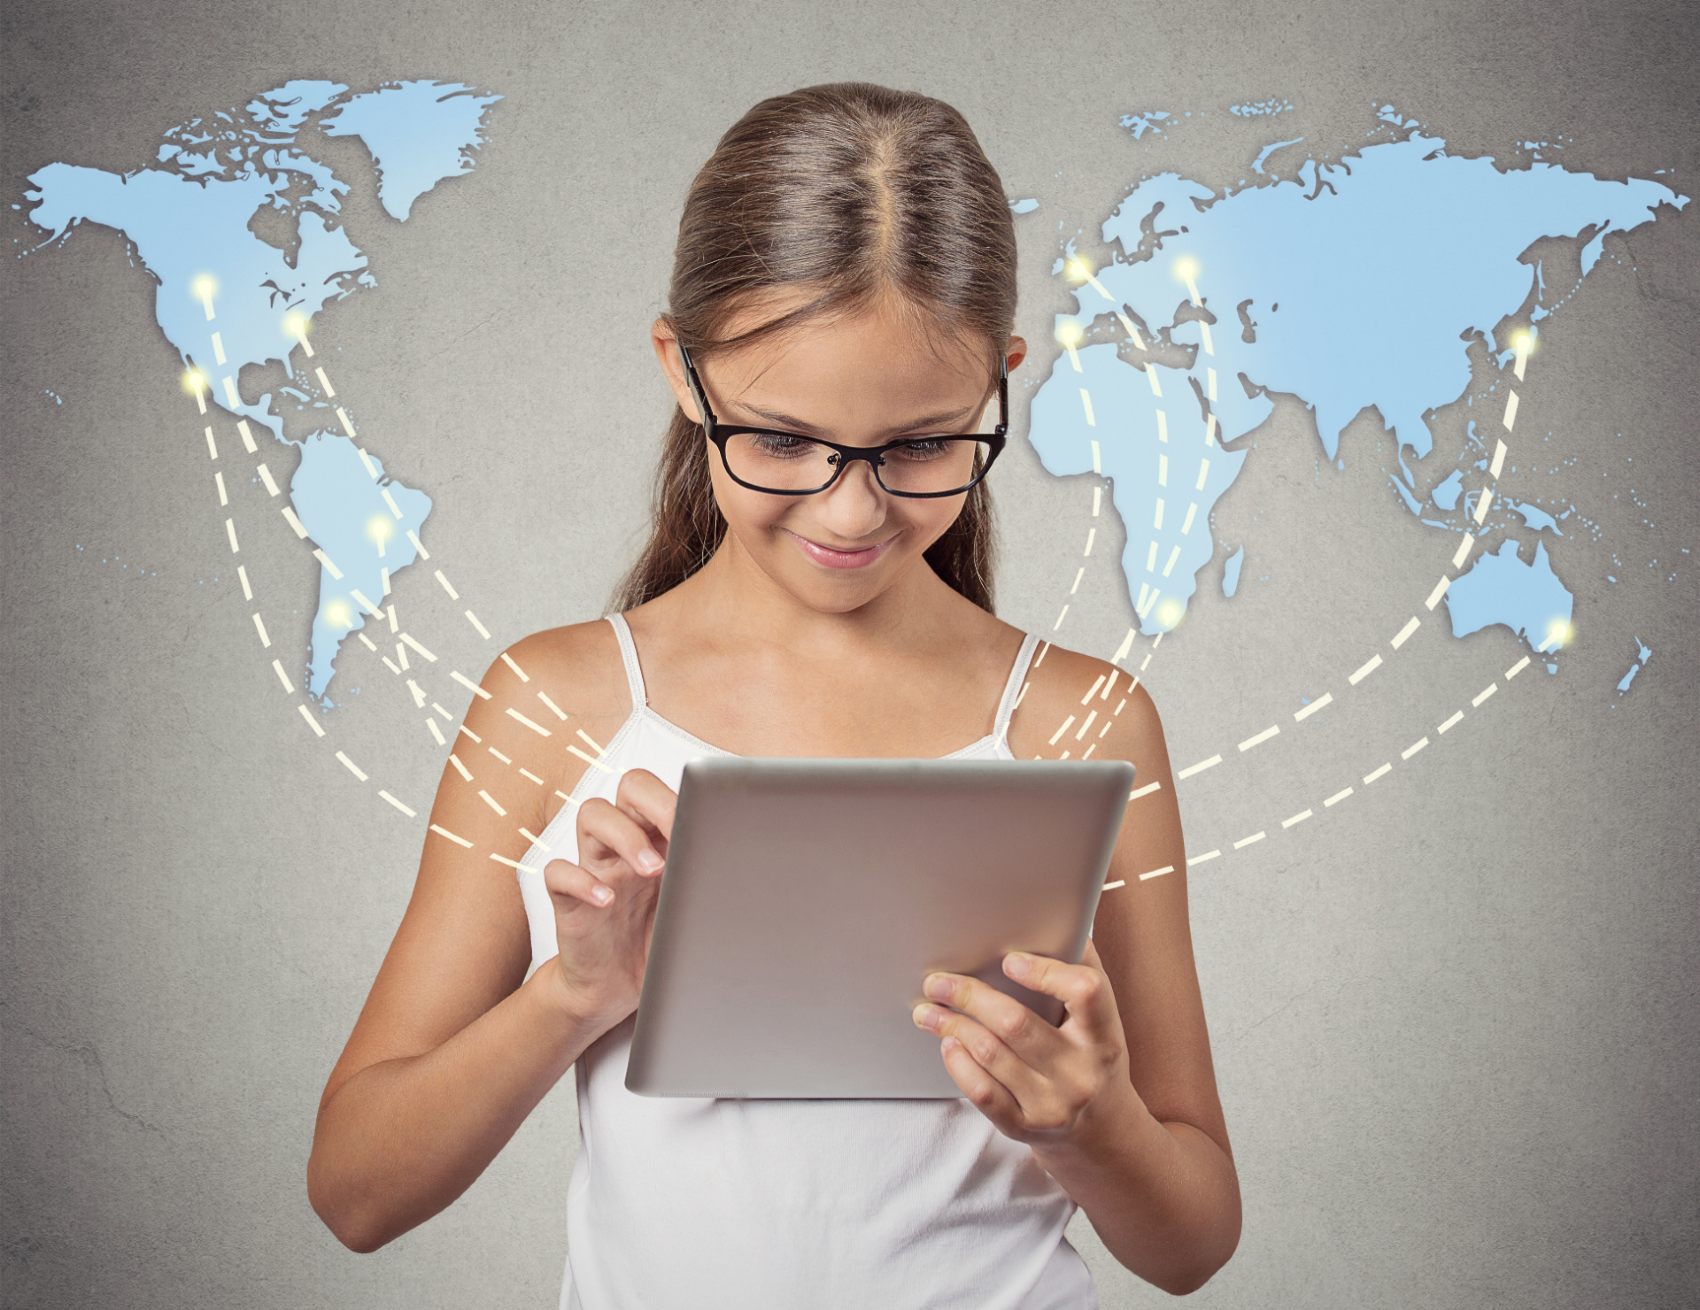 A girl wearing glasses uses an iPad as a world map projects out from it - Children's Code